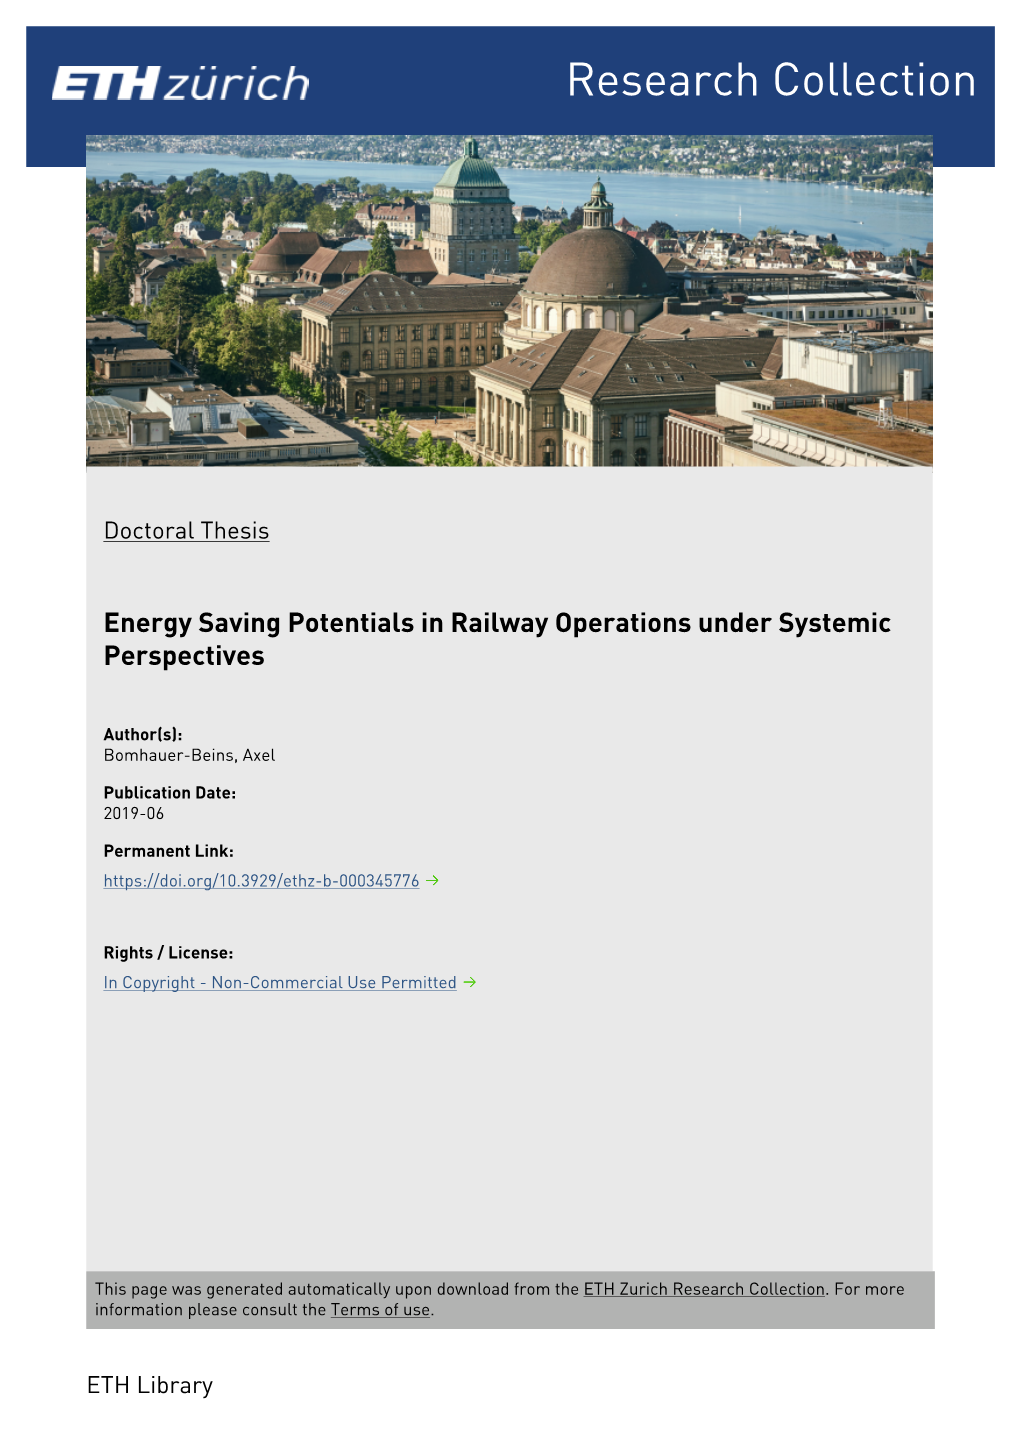 Energy Saving Potentials in Railway Operations Under Systemic Perspectives